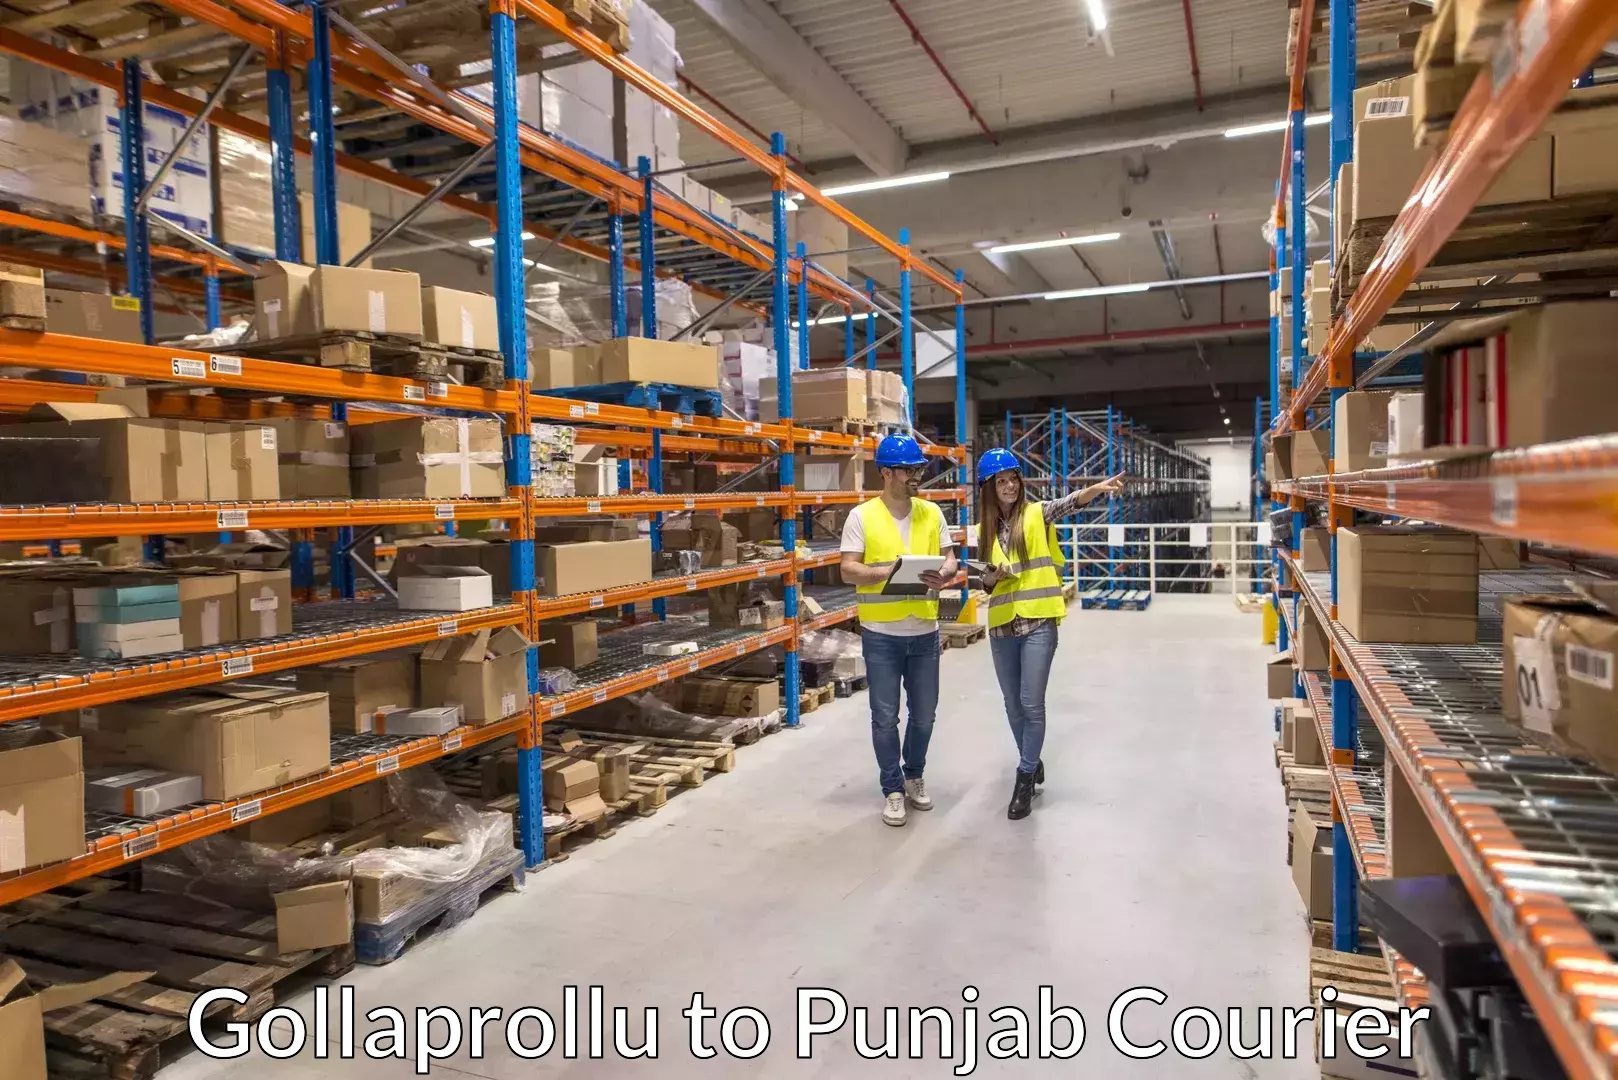 Tailored relocation services in Gollaprollu to Punjab